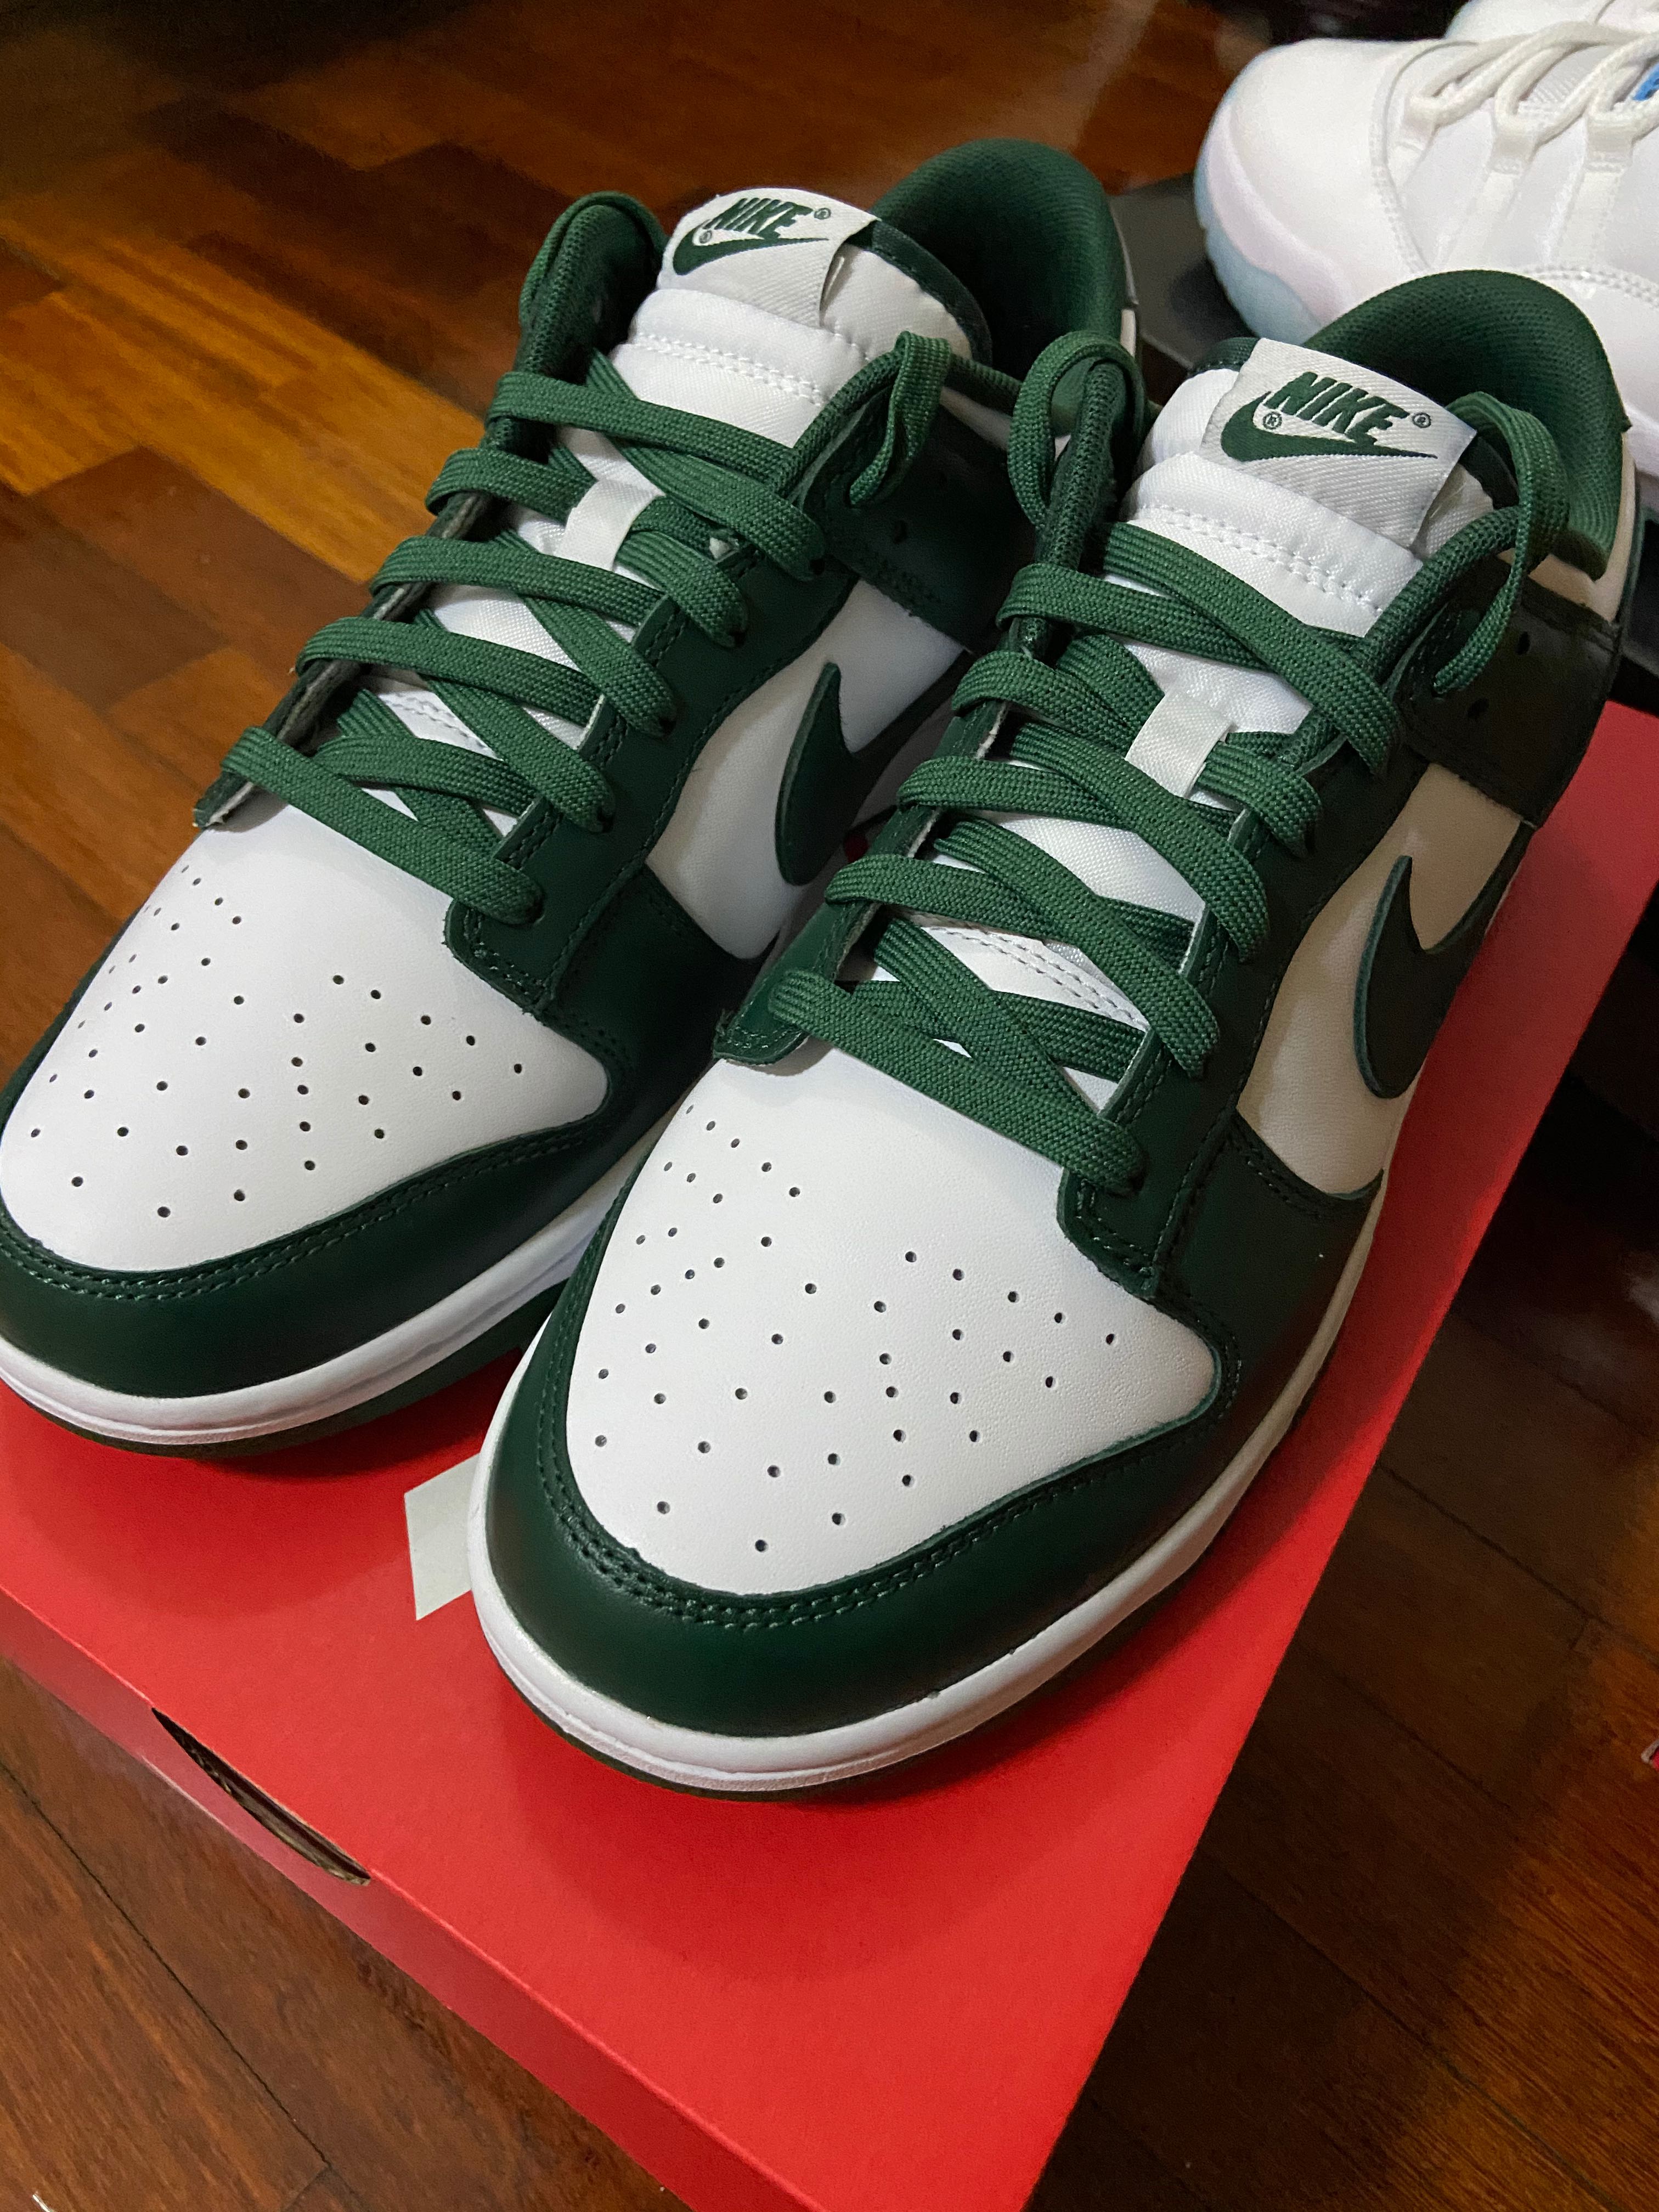 Nike Dunk Low Team Green 26cm US8dunklow